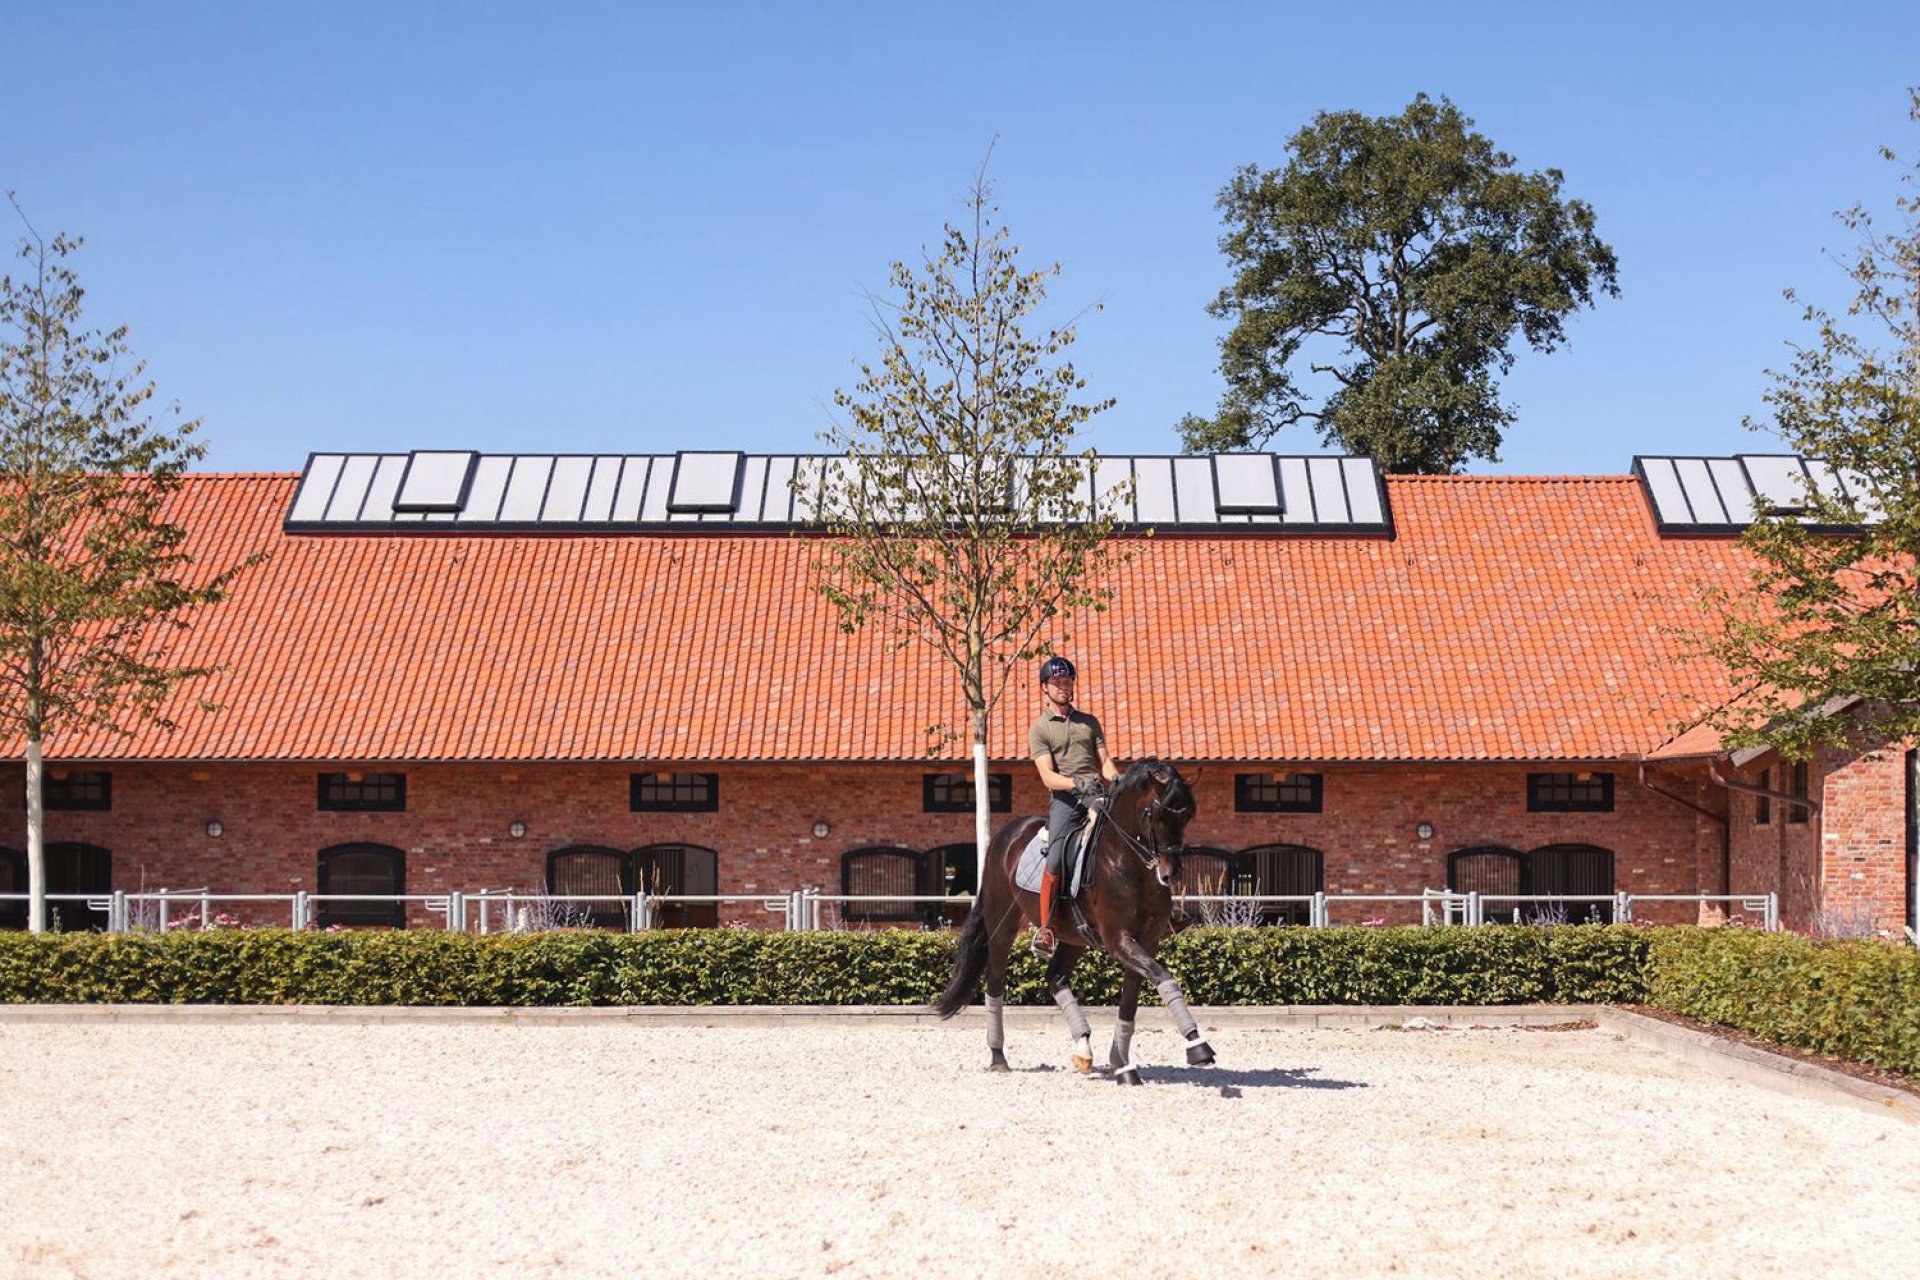 Rider with horse in the outdoor riding arena in front of the stable